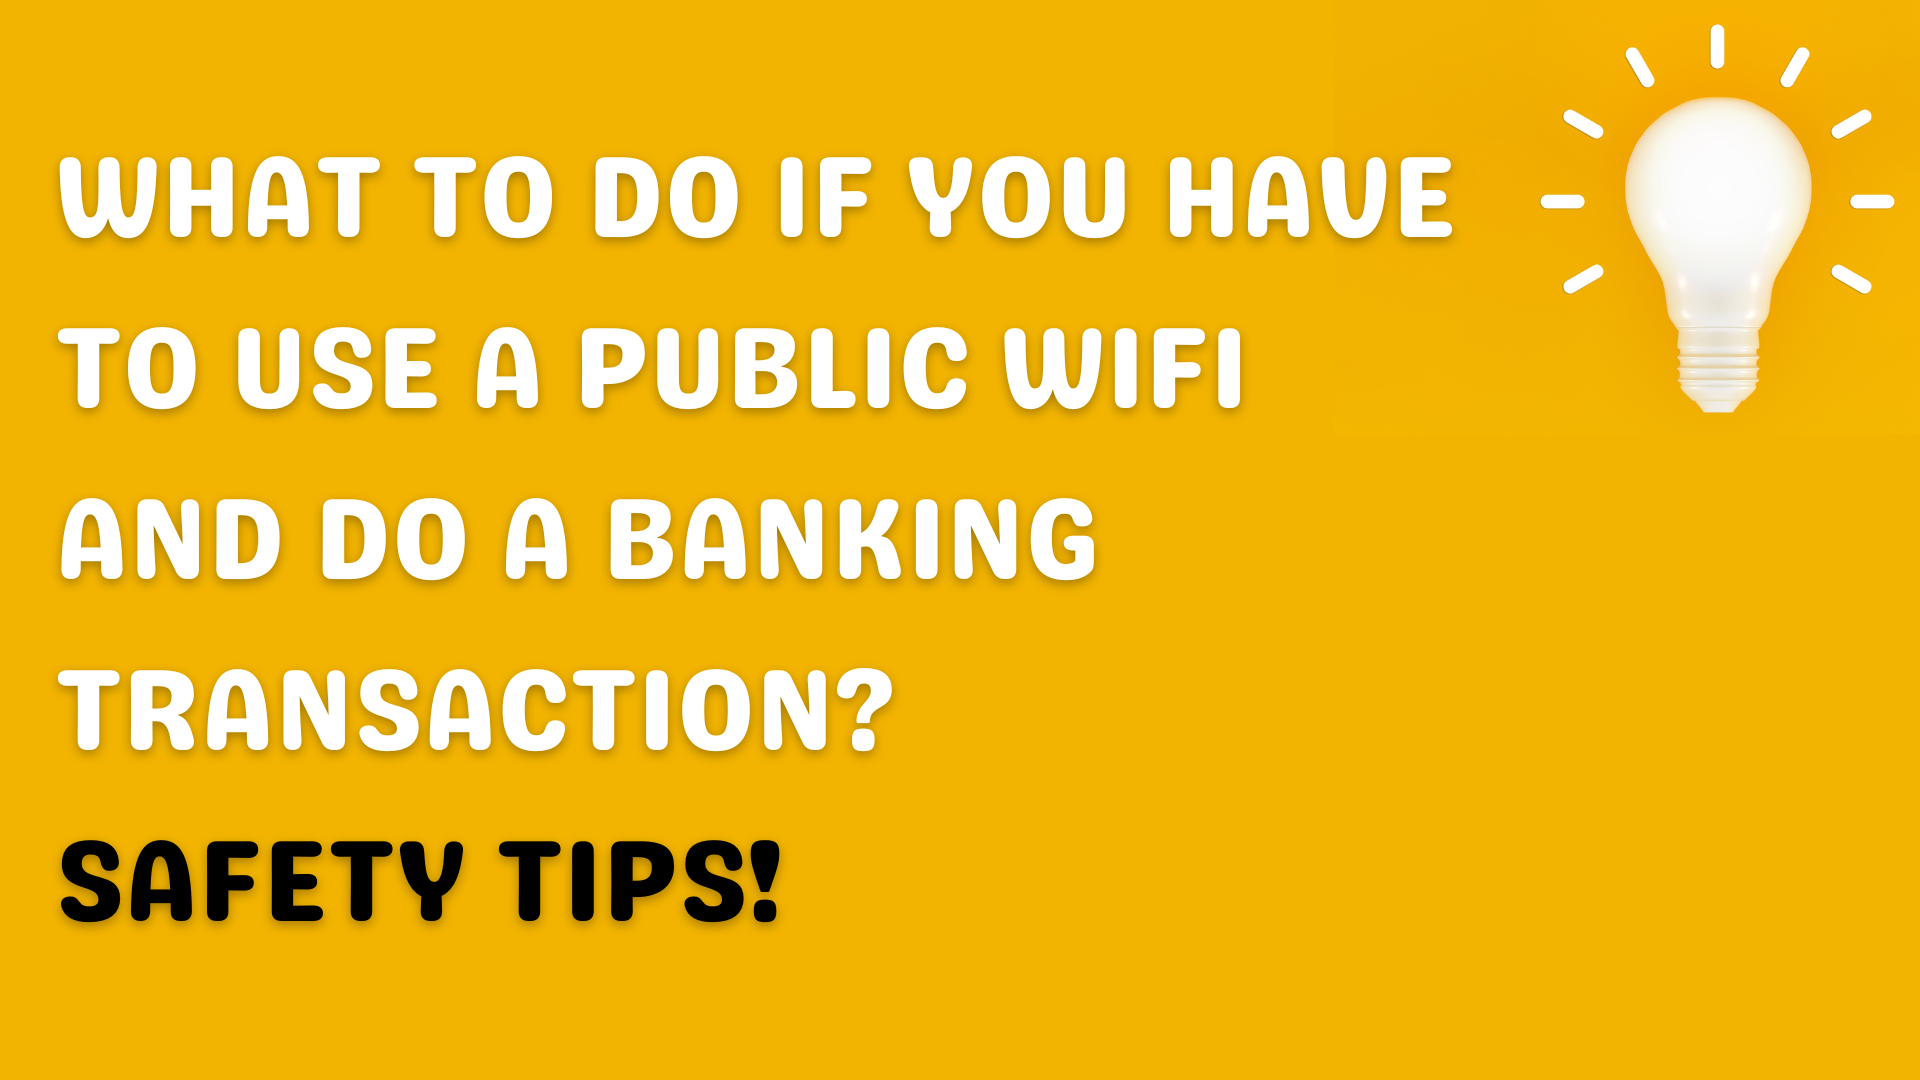 What To Do If You HAVE To Use A Public WIFI And Do A Banking Transaction? Safety Tips!